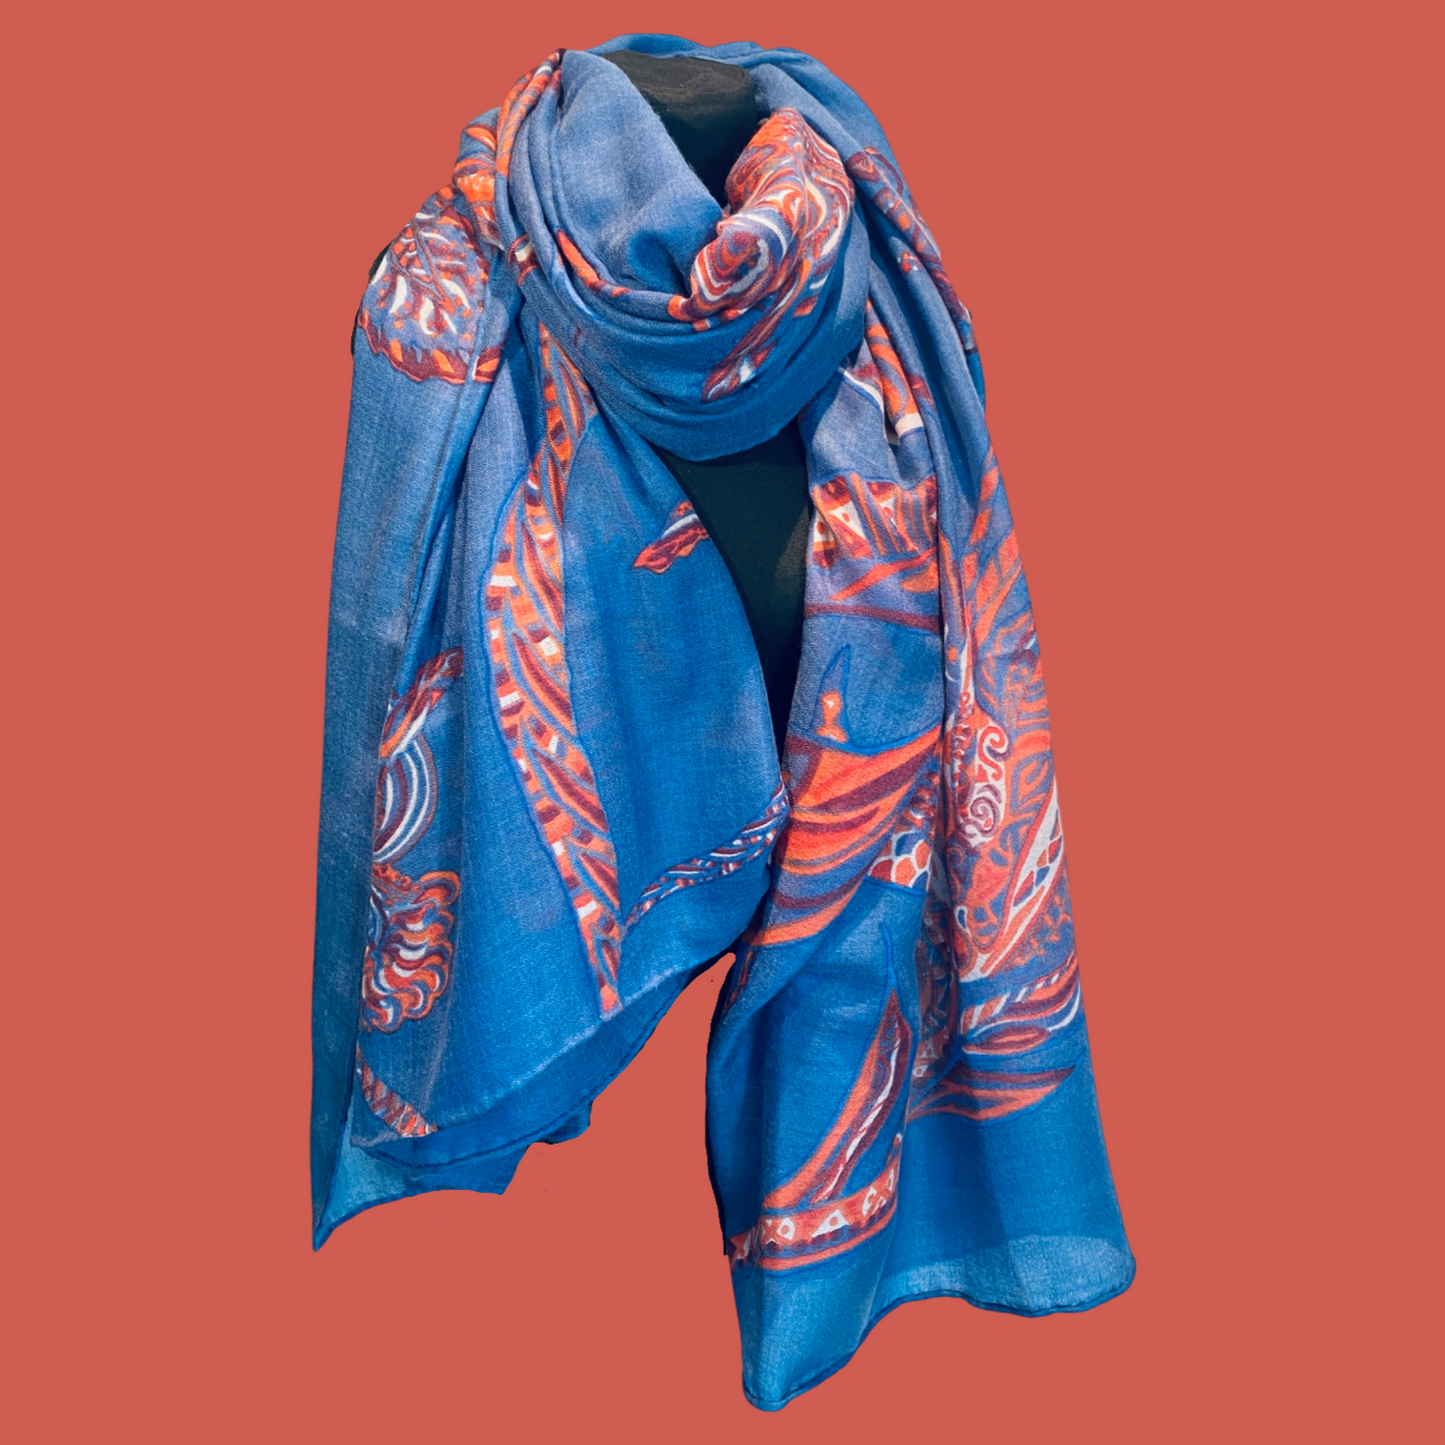 "SOUL FLOWERS" cashmere scarf - Handwoven from 100% light baby cashmere - 220x120 - bue/orange - Limited to 5 pieces